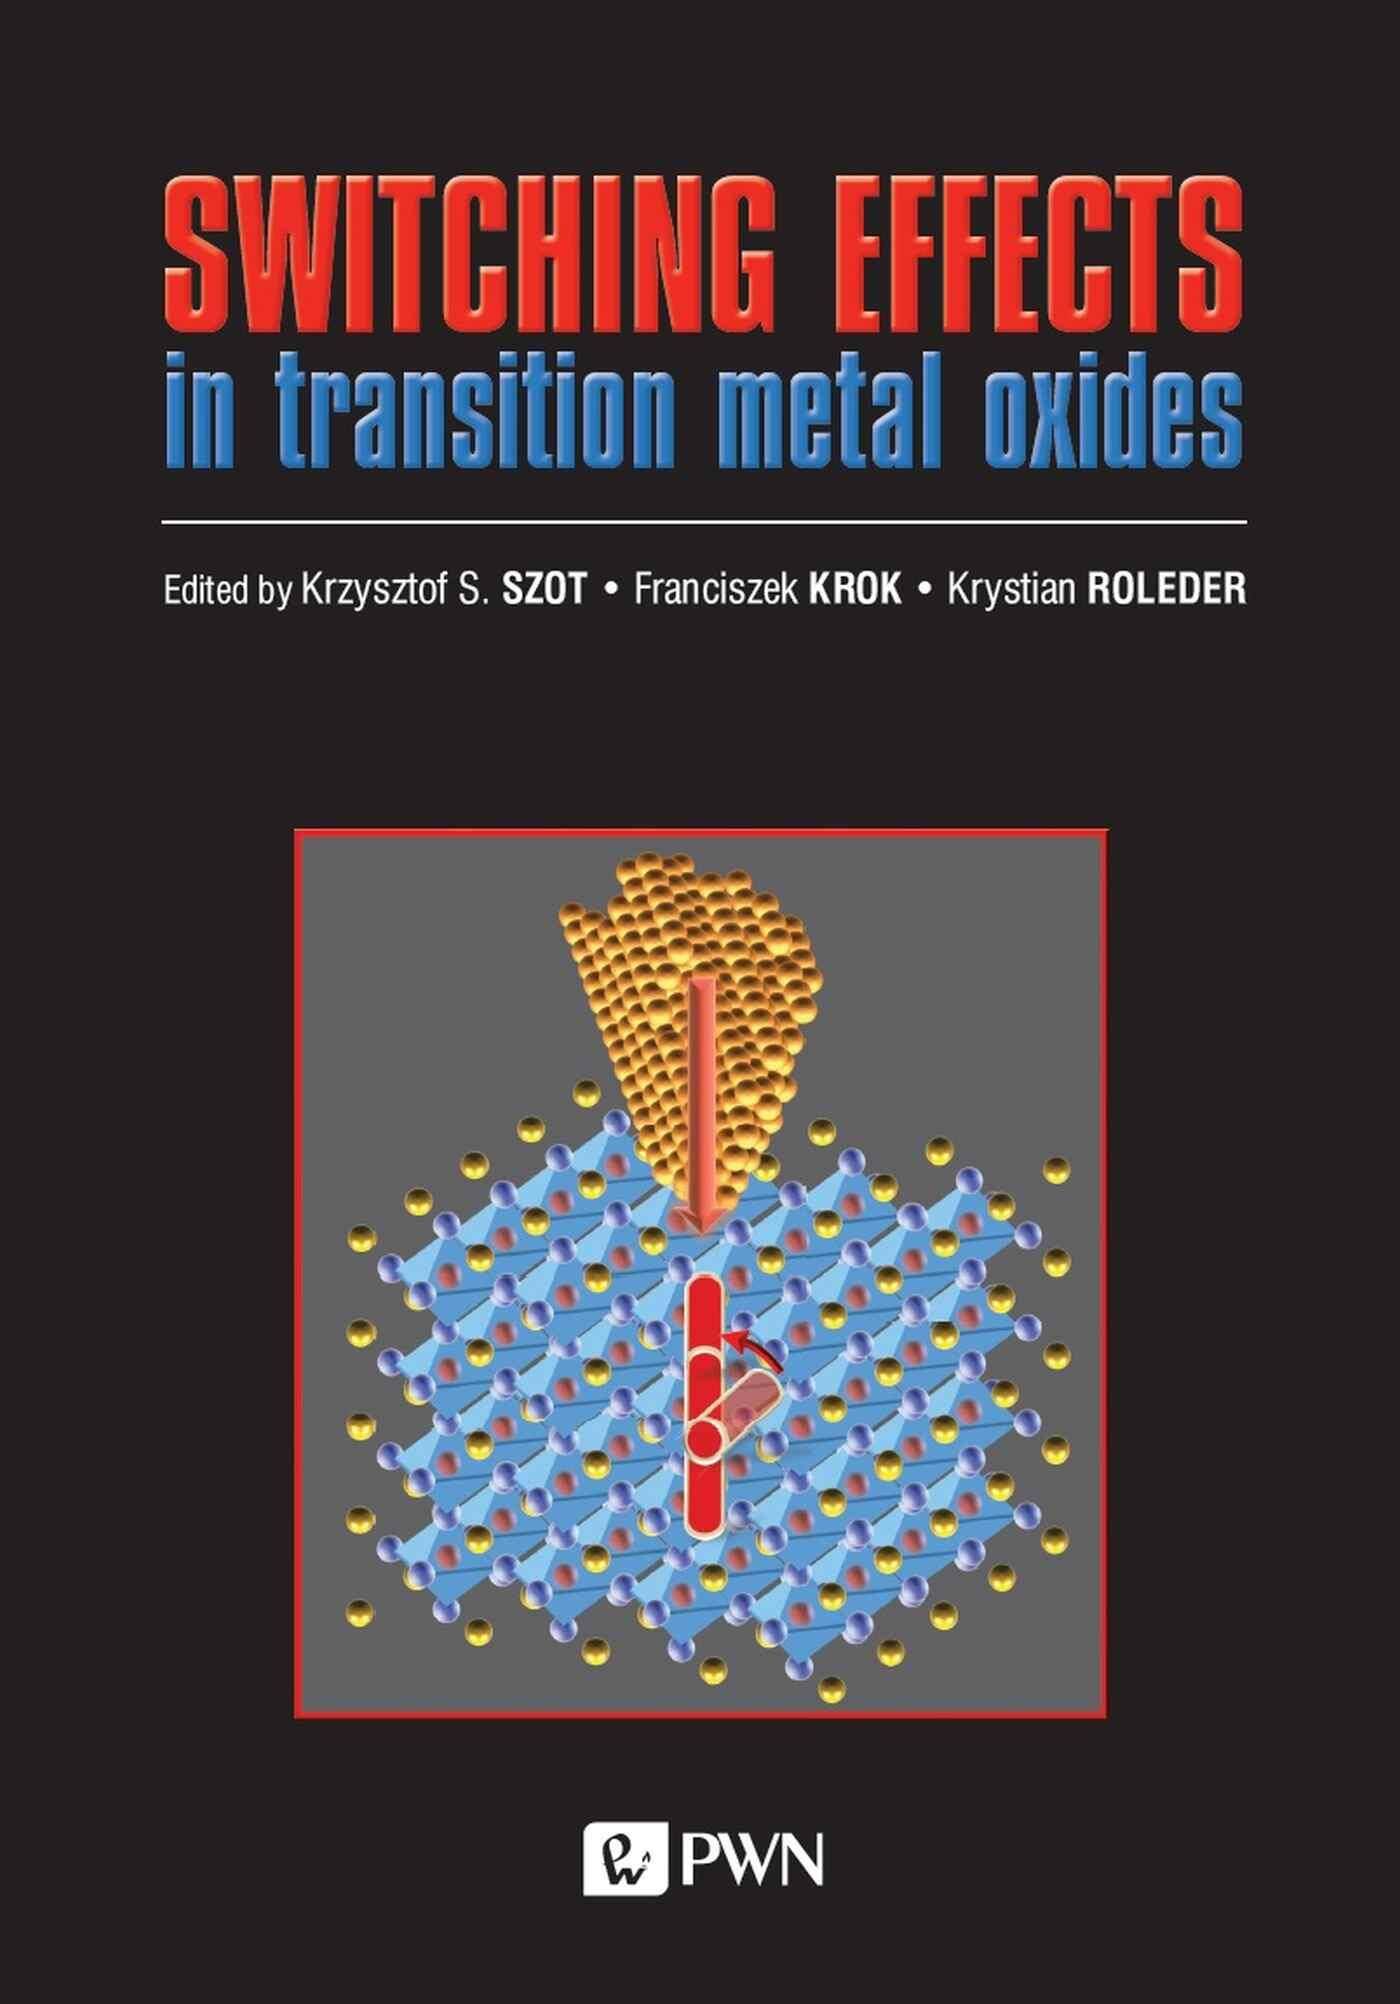 Switching effects. In transition metal oxides